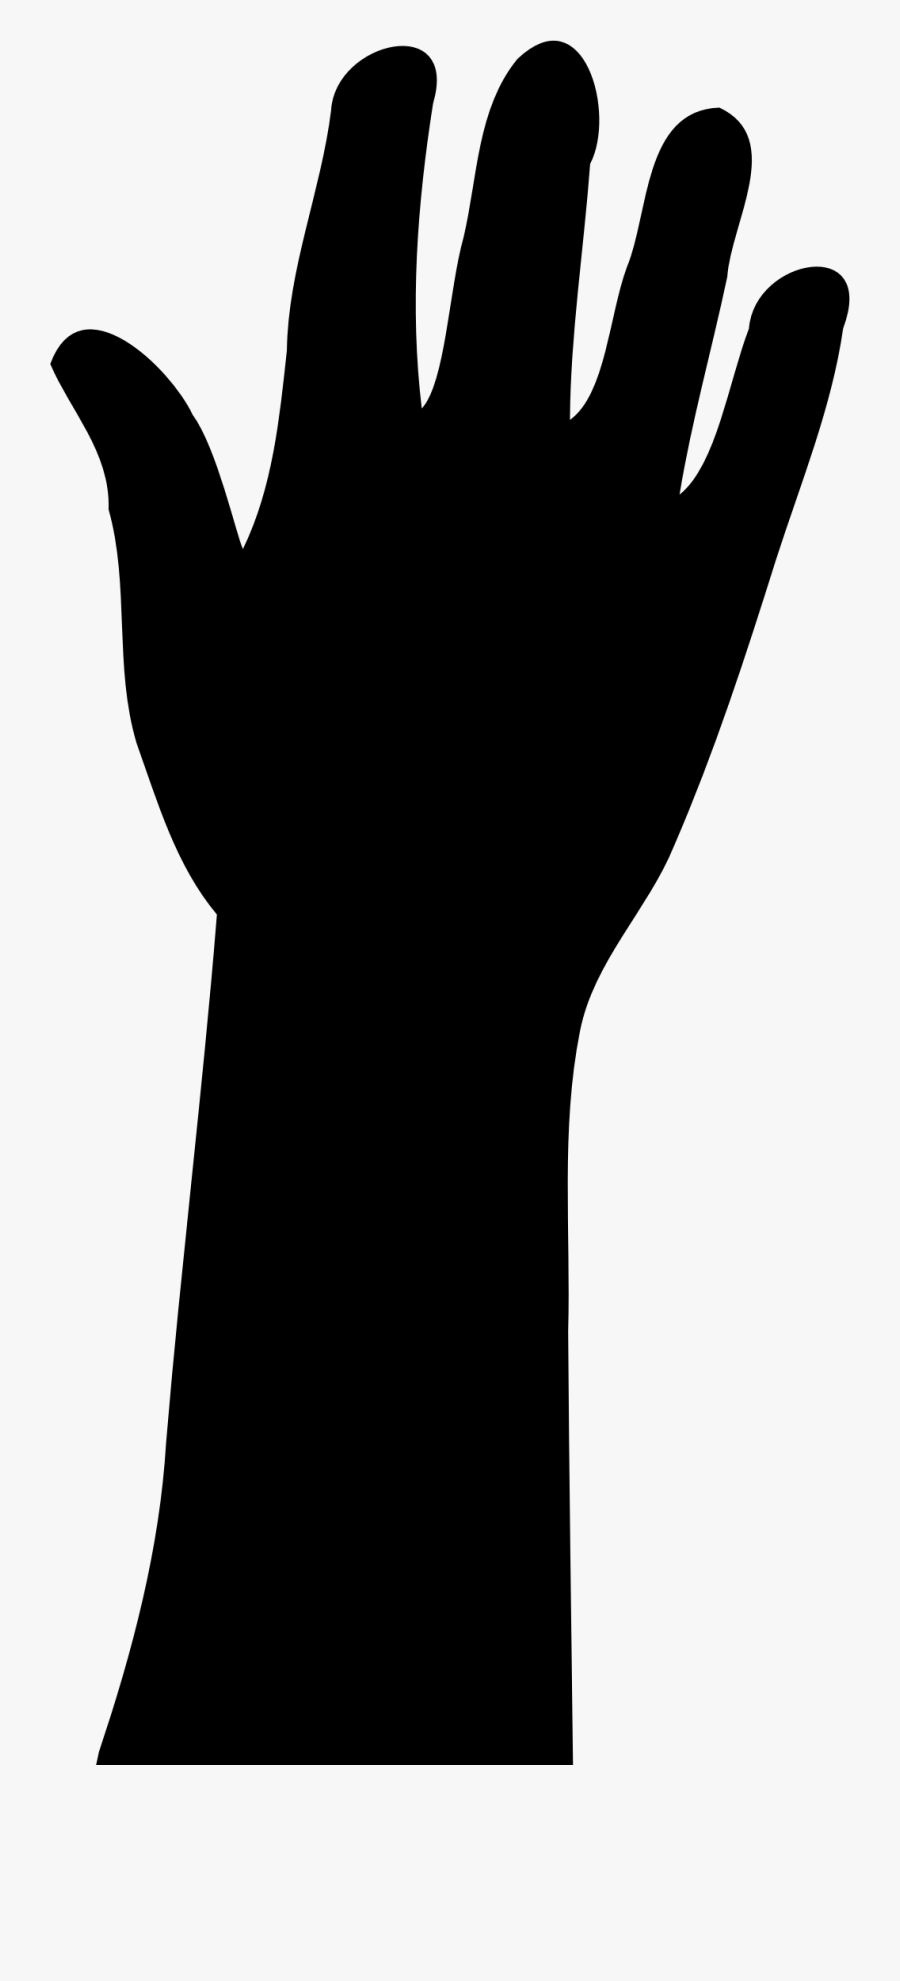 In Silhouette Big Image - Silhouette Raised Hand Clipart, Transparent Clipart